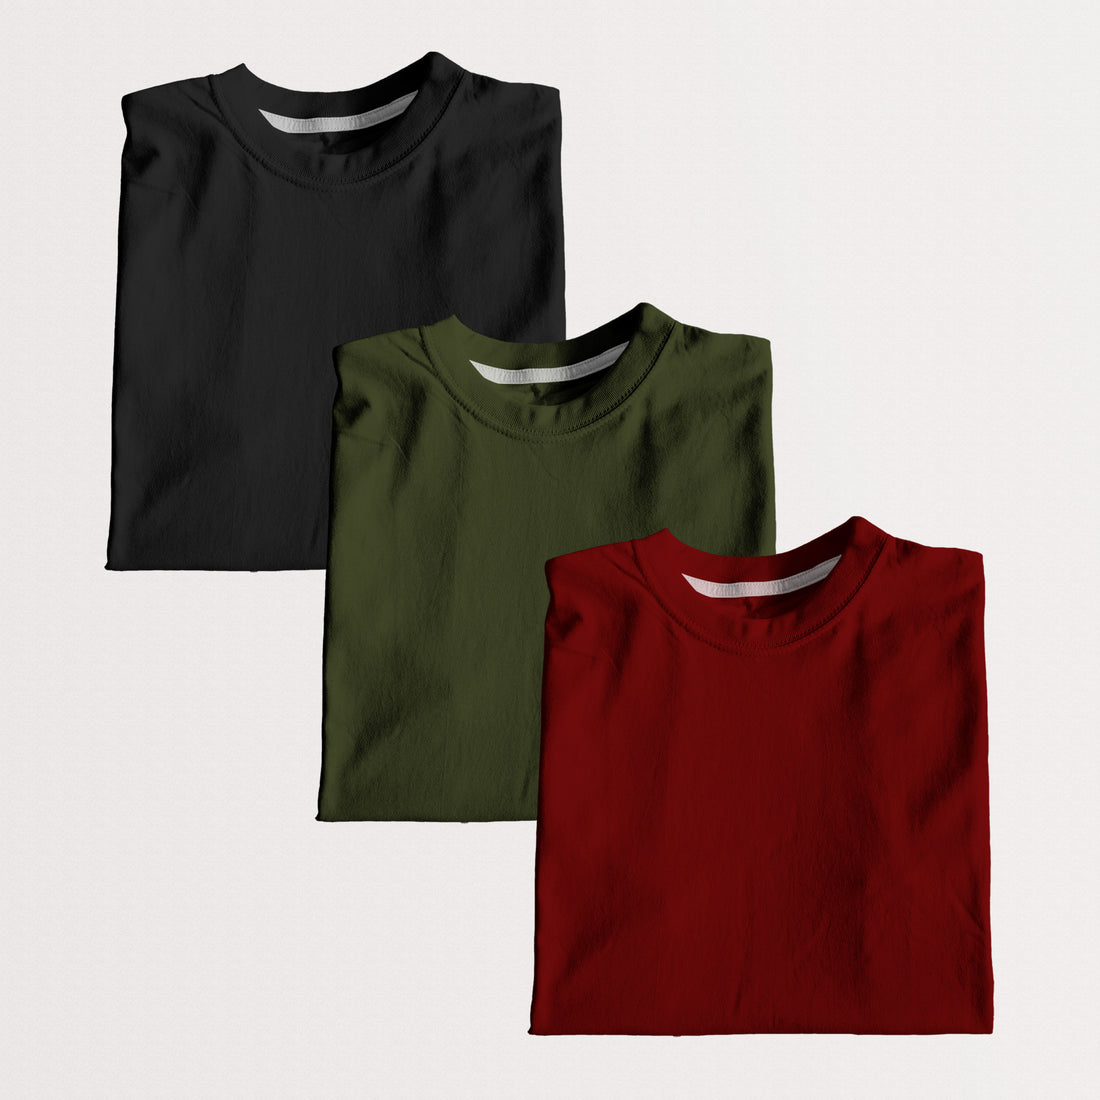 Any Pack of 3 Basic Tees